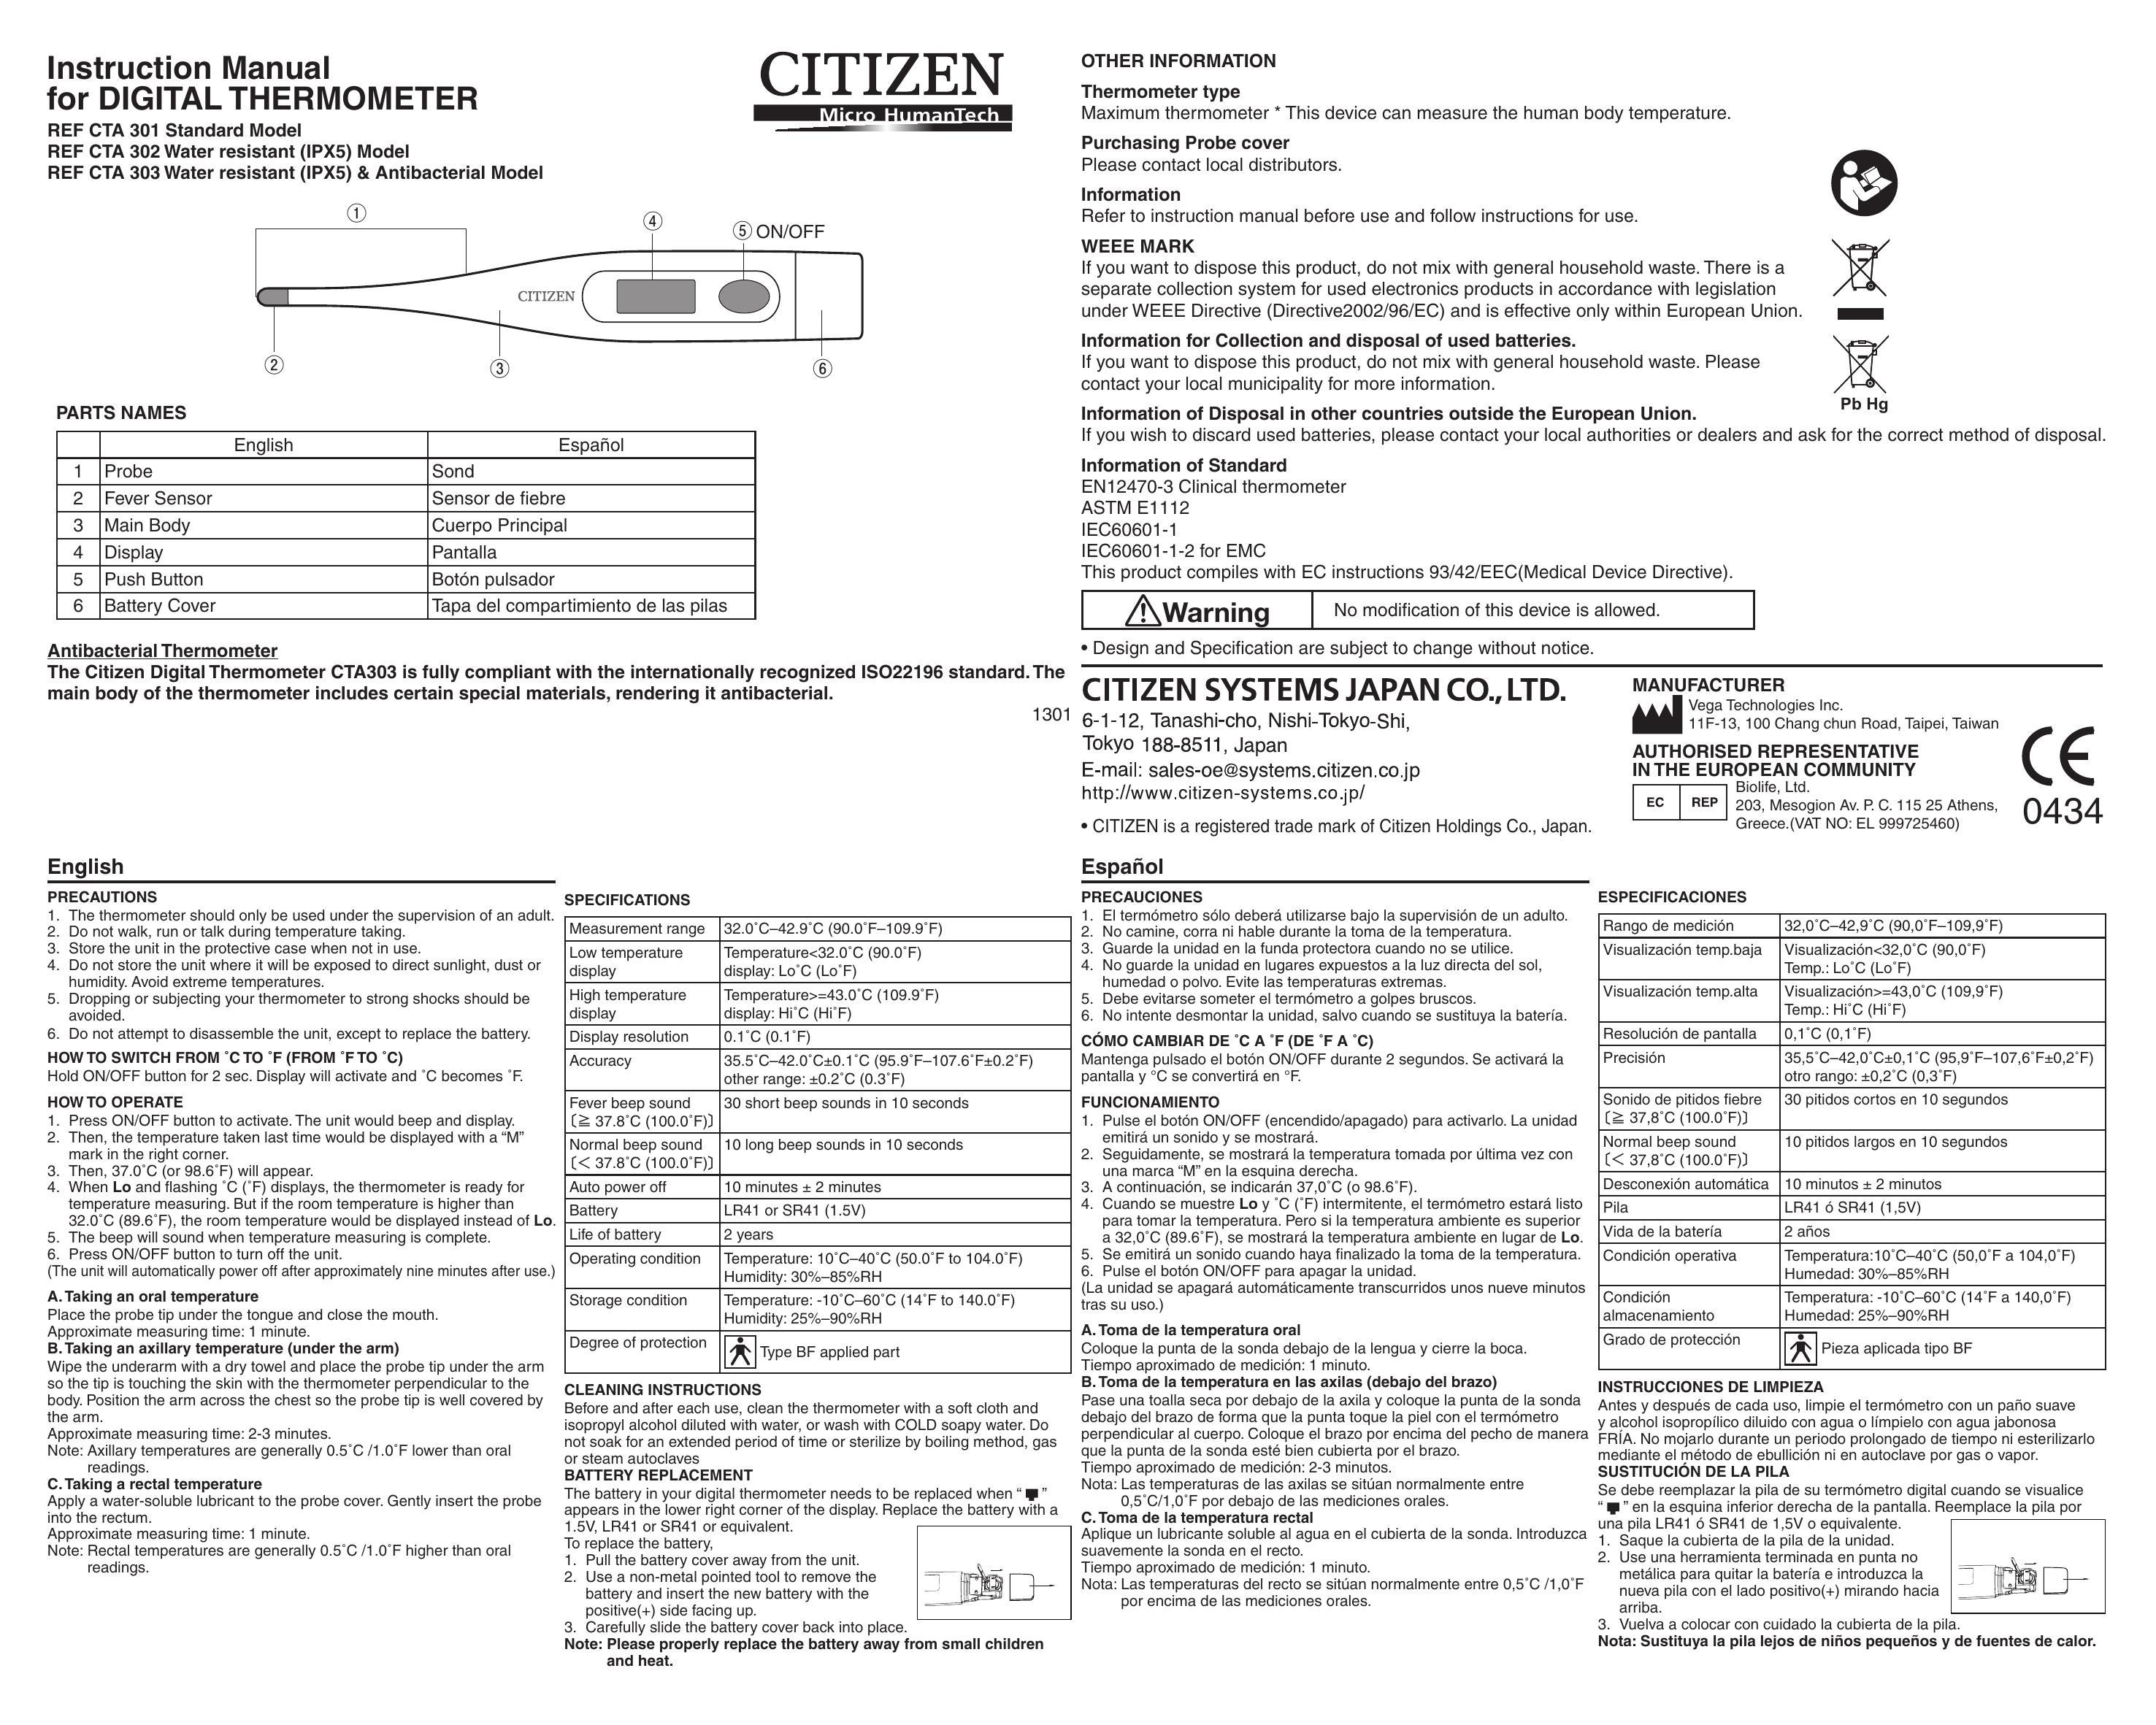 Citizen Systems REF CTA 301 Thermometer User Manual